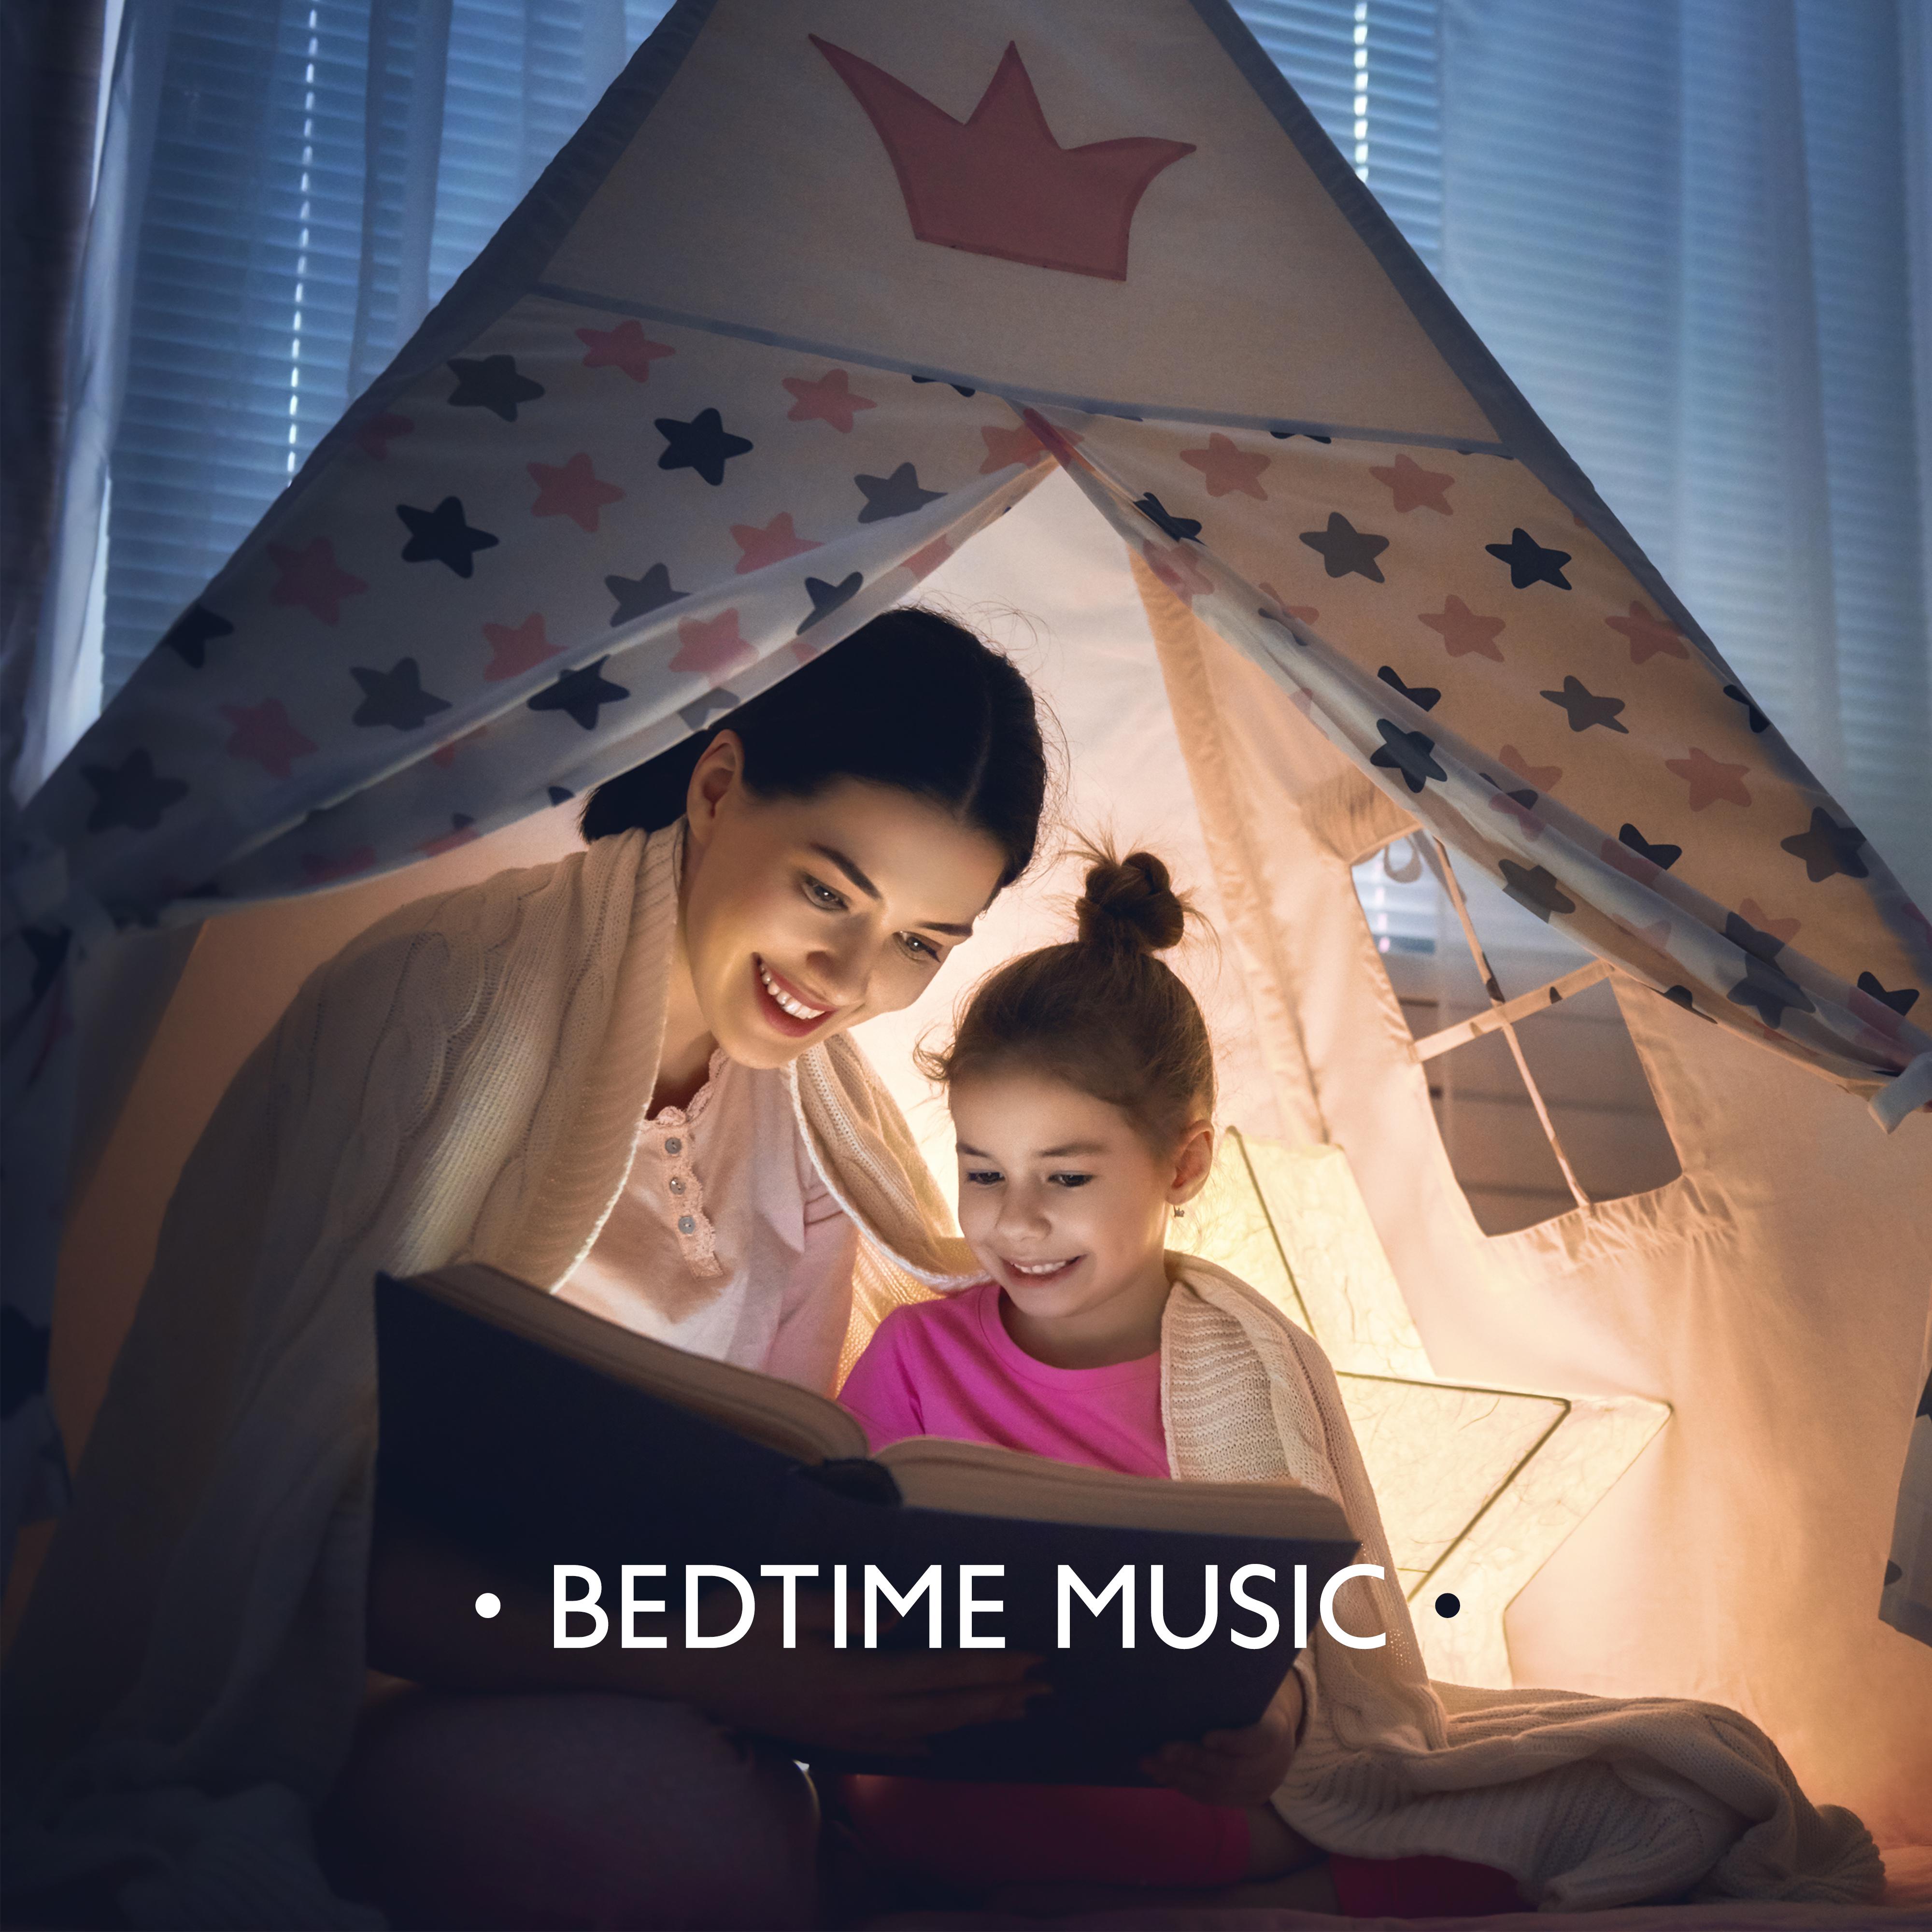 Bedtime Music - Beautiful Drowsy Melodies to Sleep, Music of Nature: Ocean, Birds, Water, Forest, Night and Rain, New Age Sounds with Guitar and Piano Accompaniment